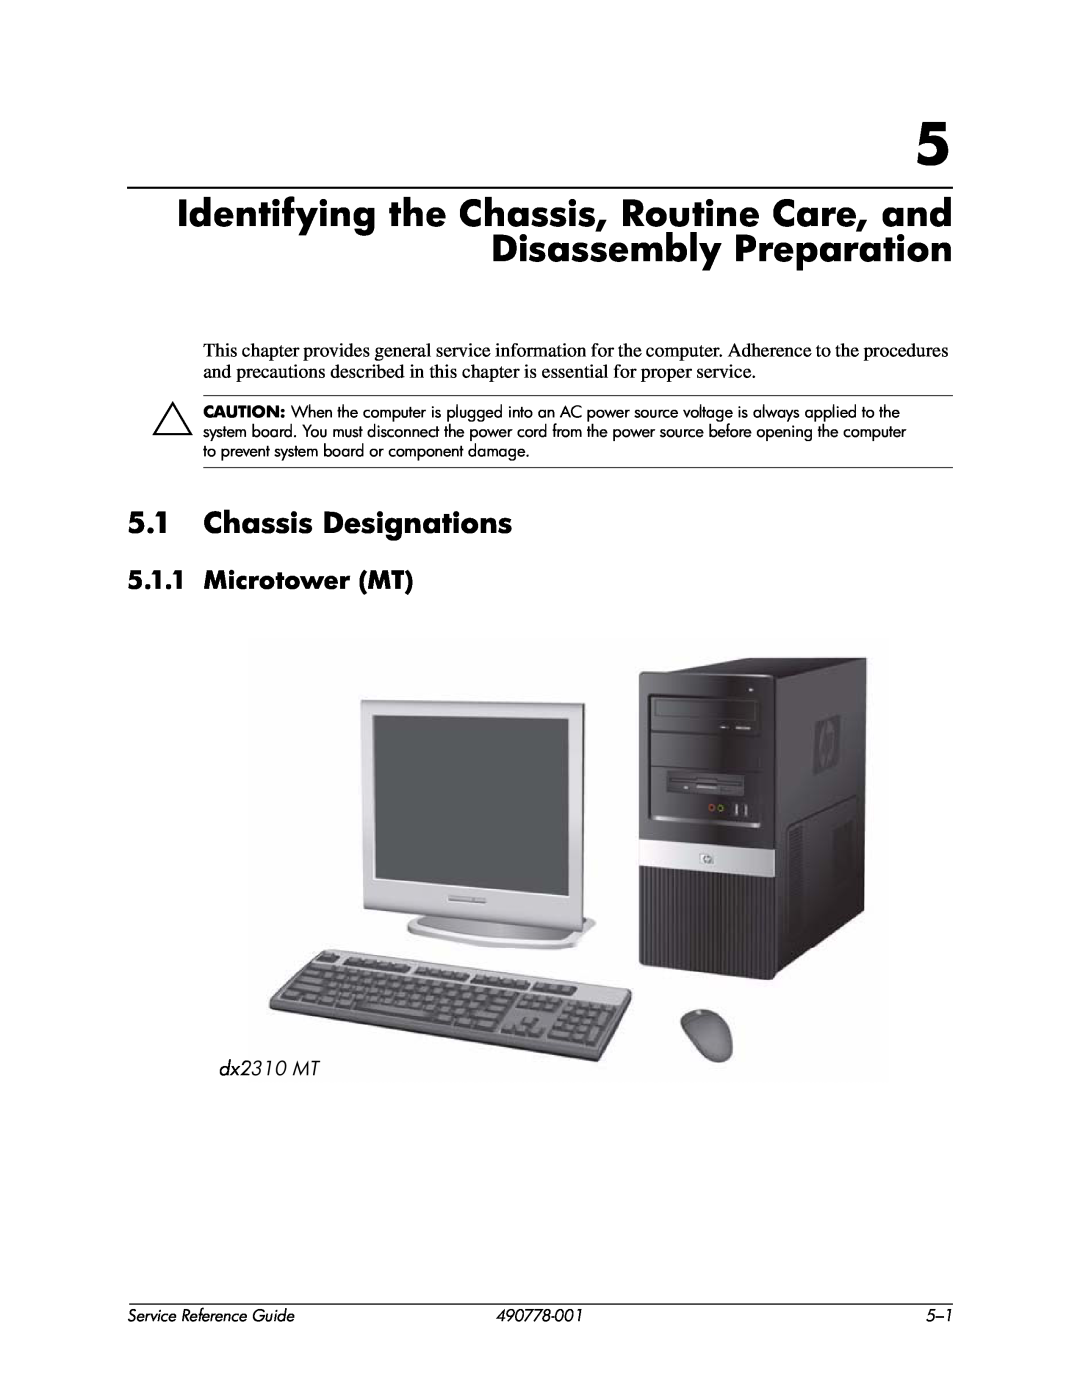 HP dx2310 manual Identifying the Chassis, Routine Care, and Disassembly Preparation, Chassis Designations, Microtower MT 